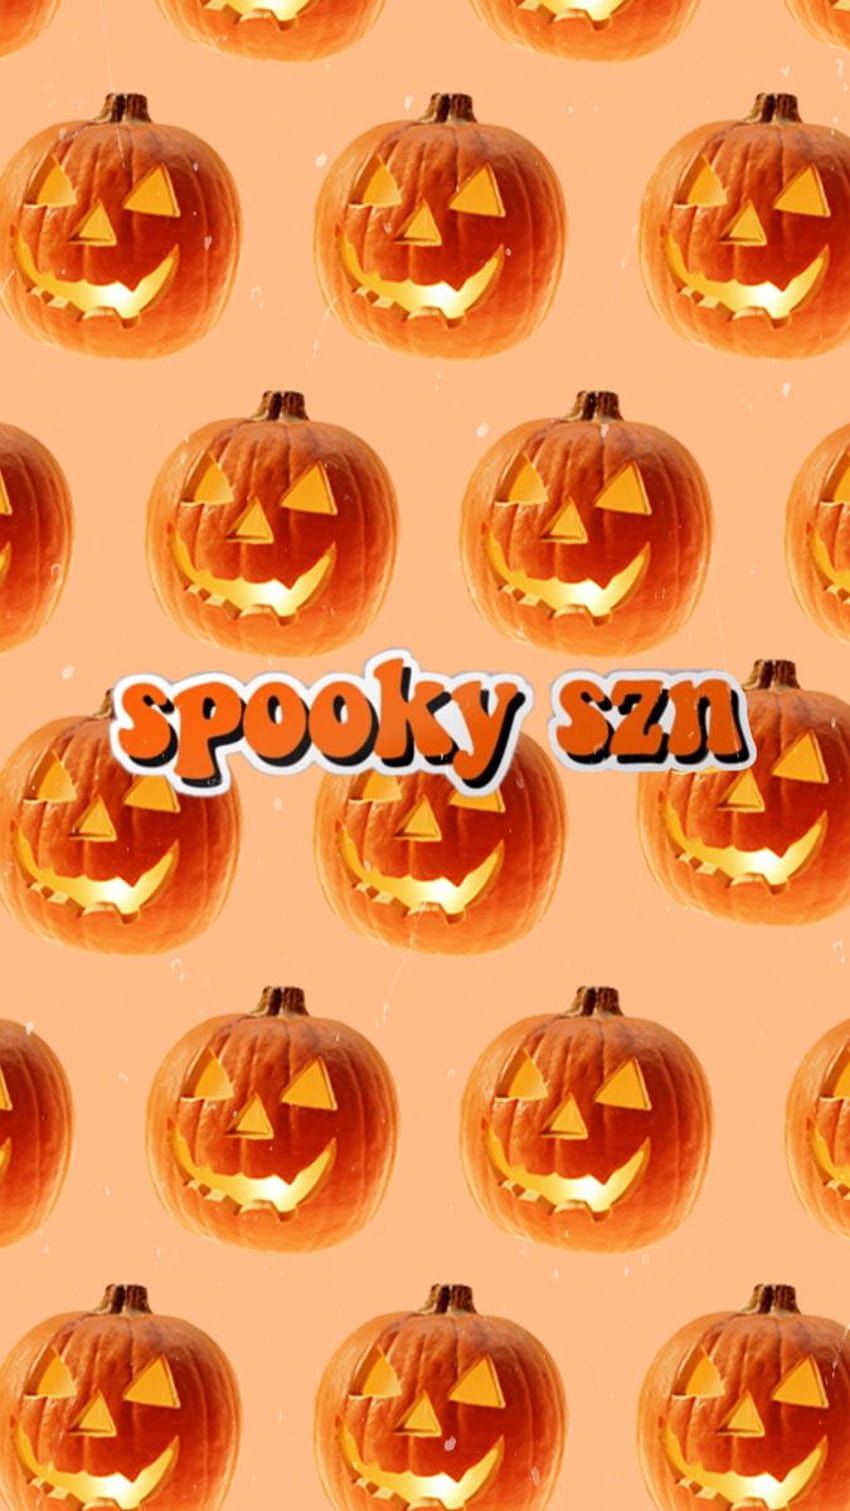 Halloween wallpaper with pumpkins and the words 